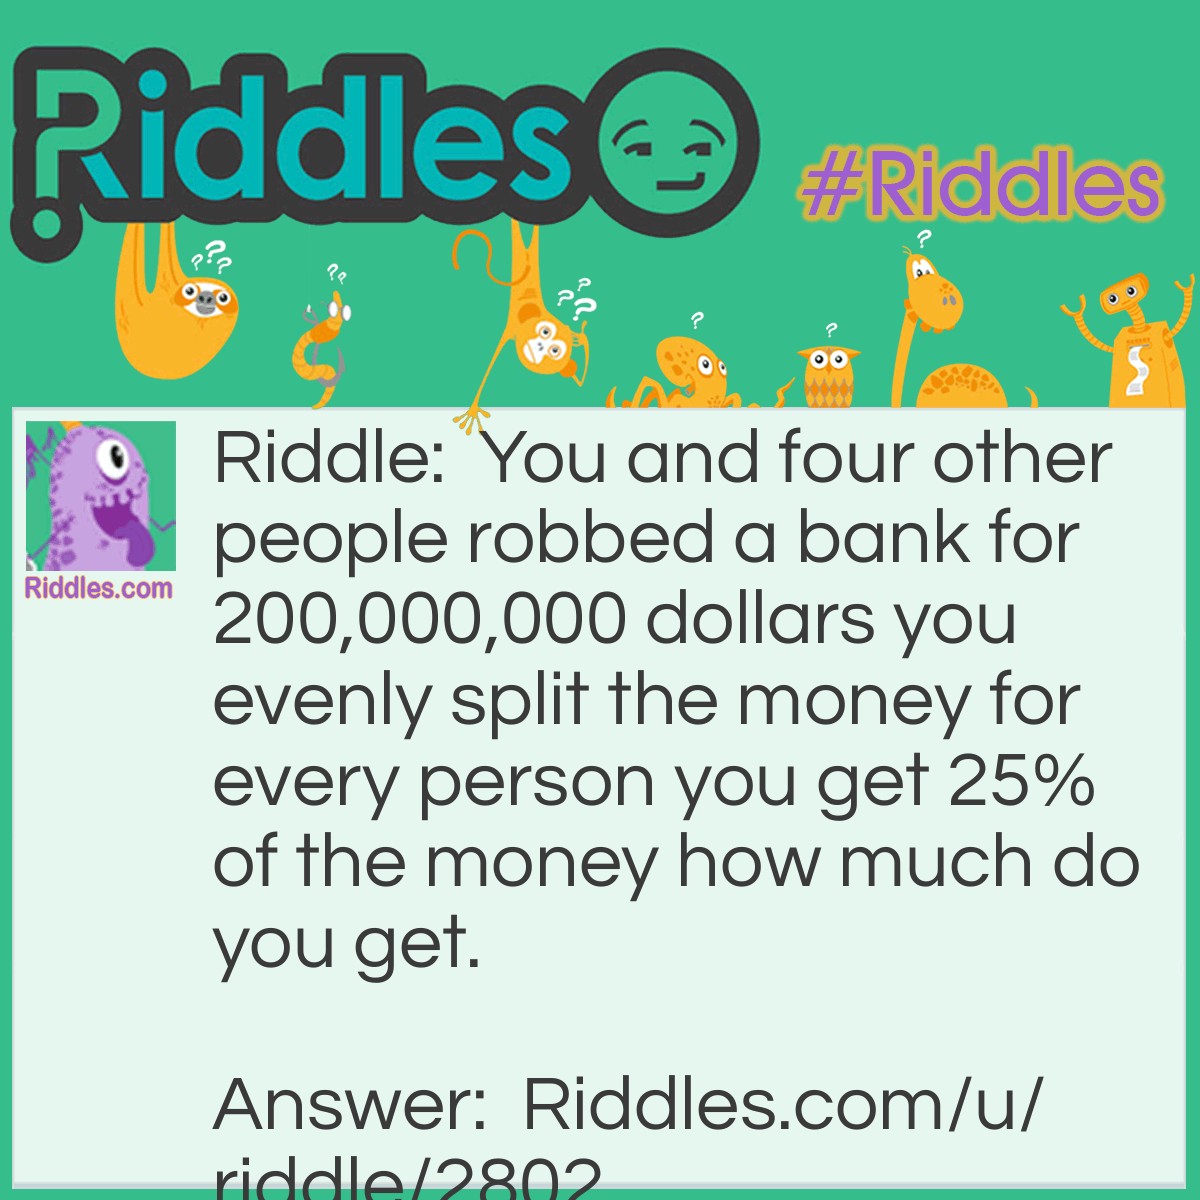 Riddle: You and four other people robbed a bank for 200,000,000 dollars you evenly split the money for every person you get 25% of the money how much do you get. Answer: You get a 100% cut because 25% x 4 = 100%.